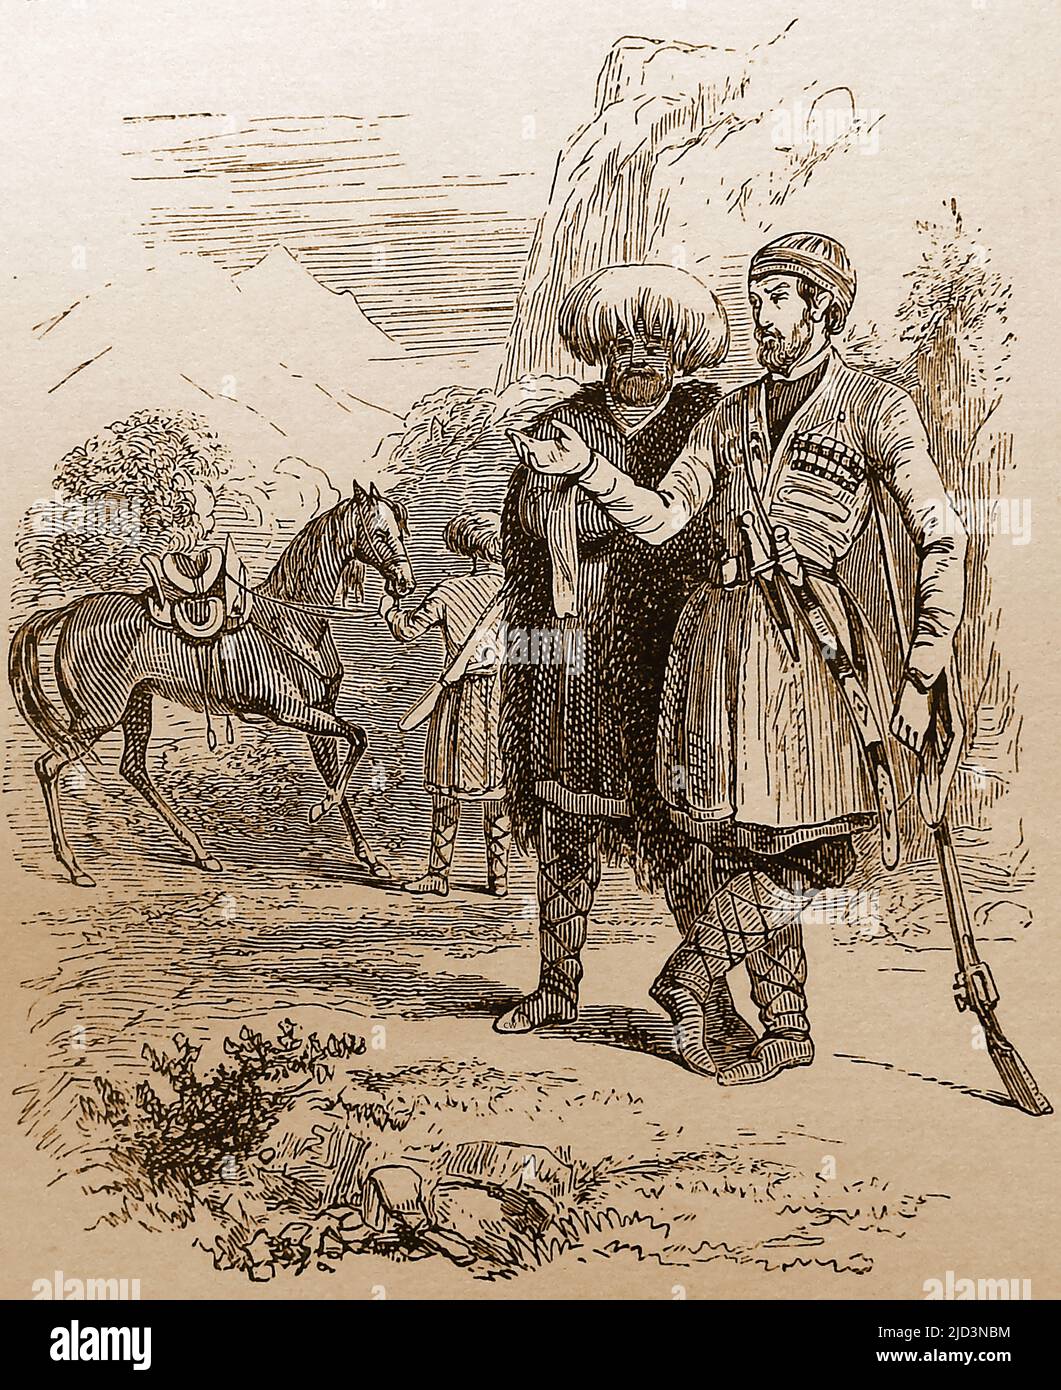 A late 19th century  engraving of male  residents of Circassia  in typical dress of the time, Circassia, also known variously as Cherkessia, Adıgə Xəku, Adıgey, Adyghe: Адыгэ Хэку, Адыгей, Çerkezistan, and Çerkesya in various cultures, was a country destroyed and devastated after the Russian-Circassian War (1763–1864). It  was infamous for the Circassian genocide when 90% of the population was either massacred or exiled. It is now recognised as a region of the North Caucasus.  -- Гравюра конца 19-го века с изображением мужчин-жителей Черкесии в типичной одежде того времени Stock Photo